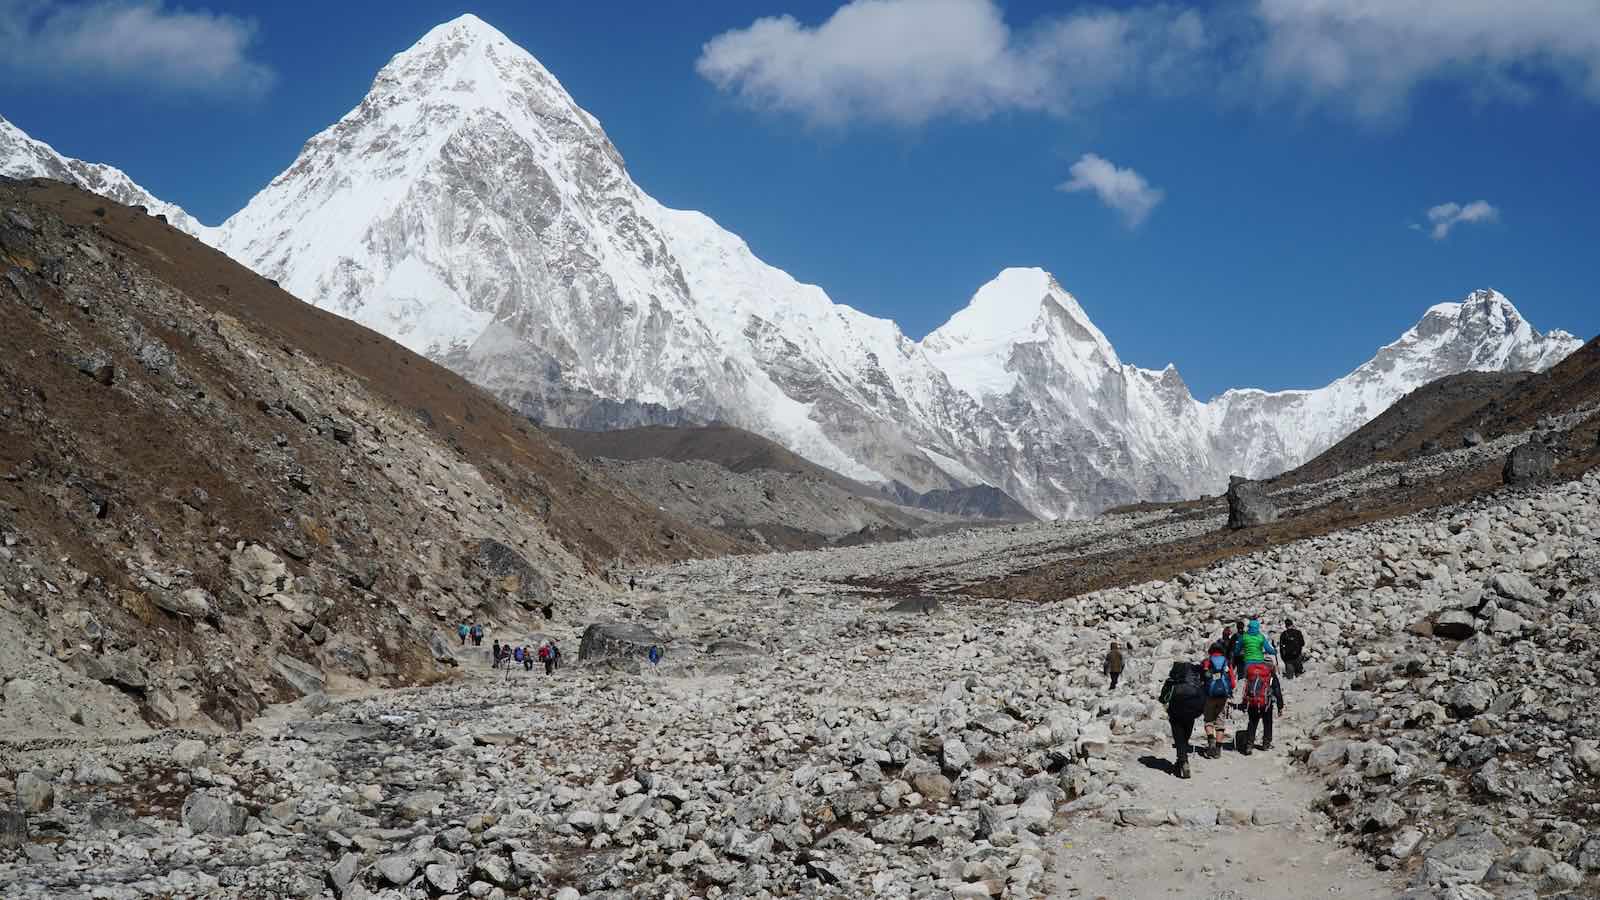 Second half was a giant uphill climb to a place called 'Memory Hill' and then mostly flat rocky terrain to Lobuche